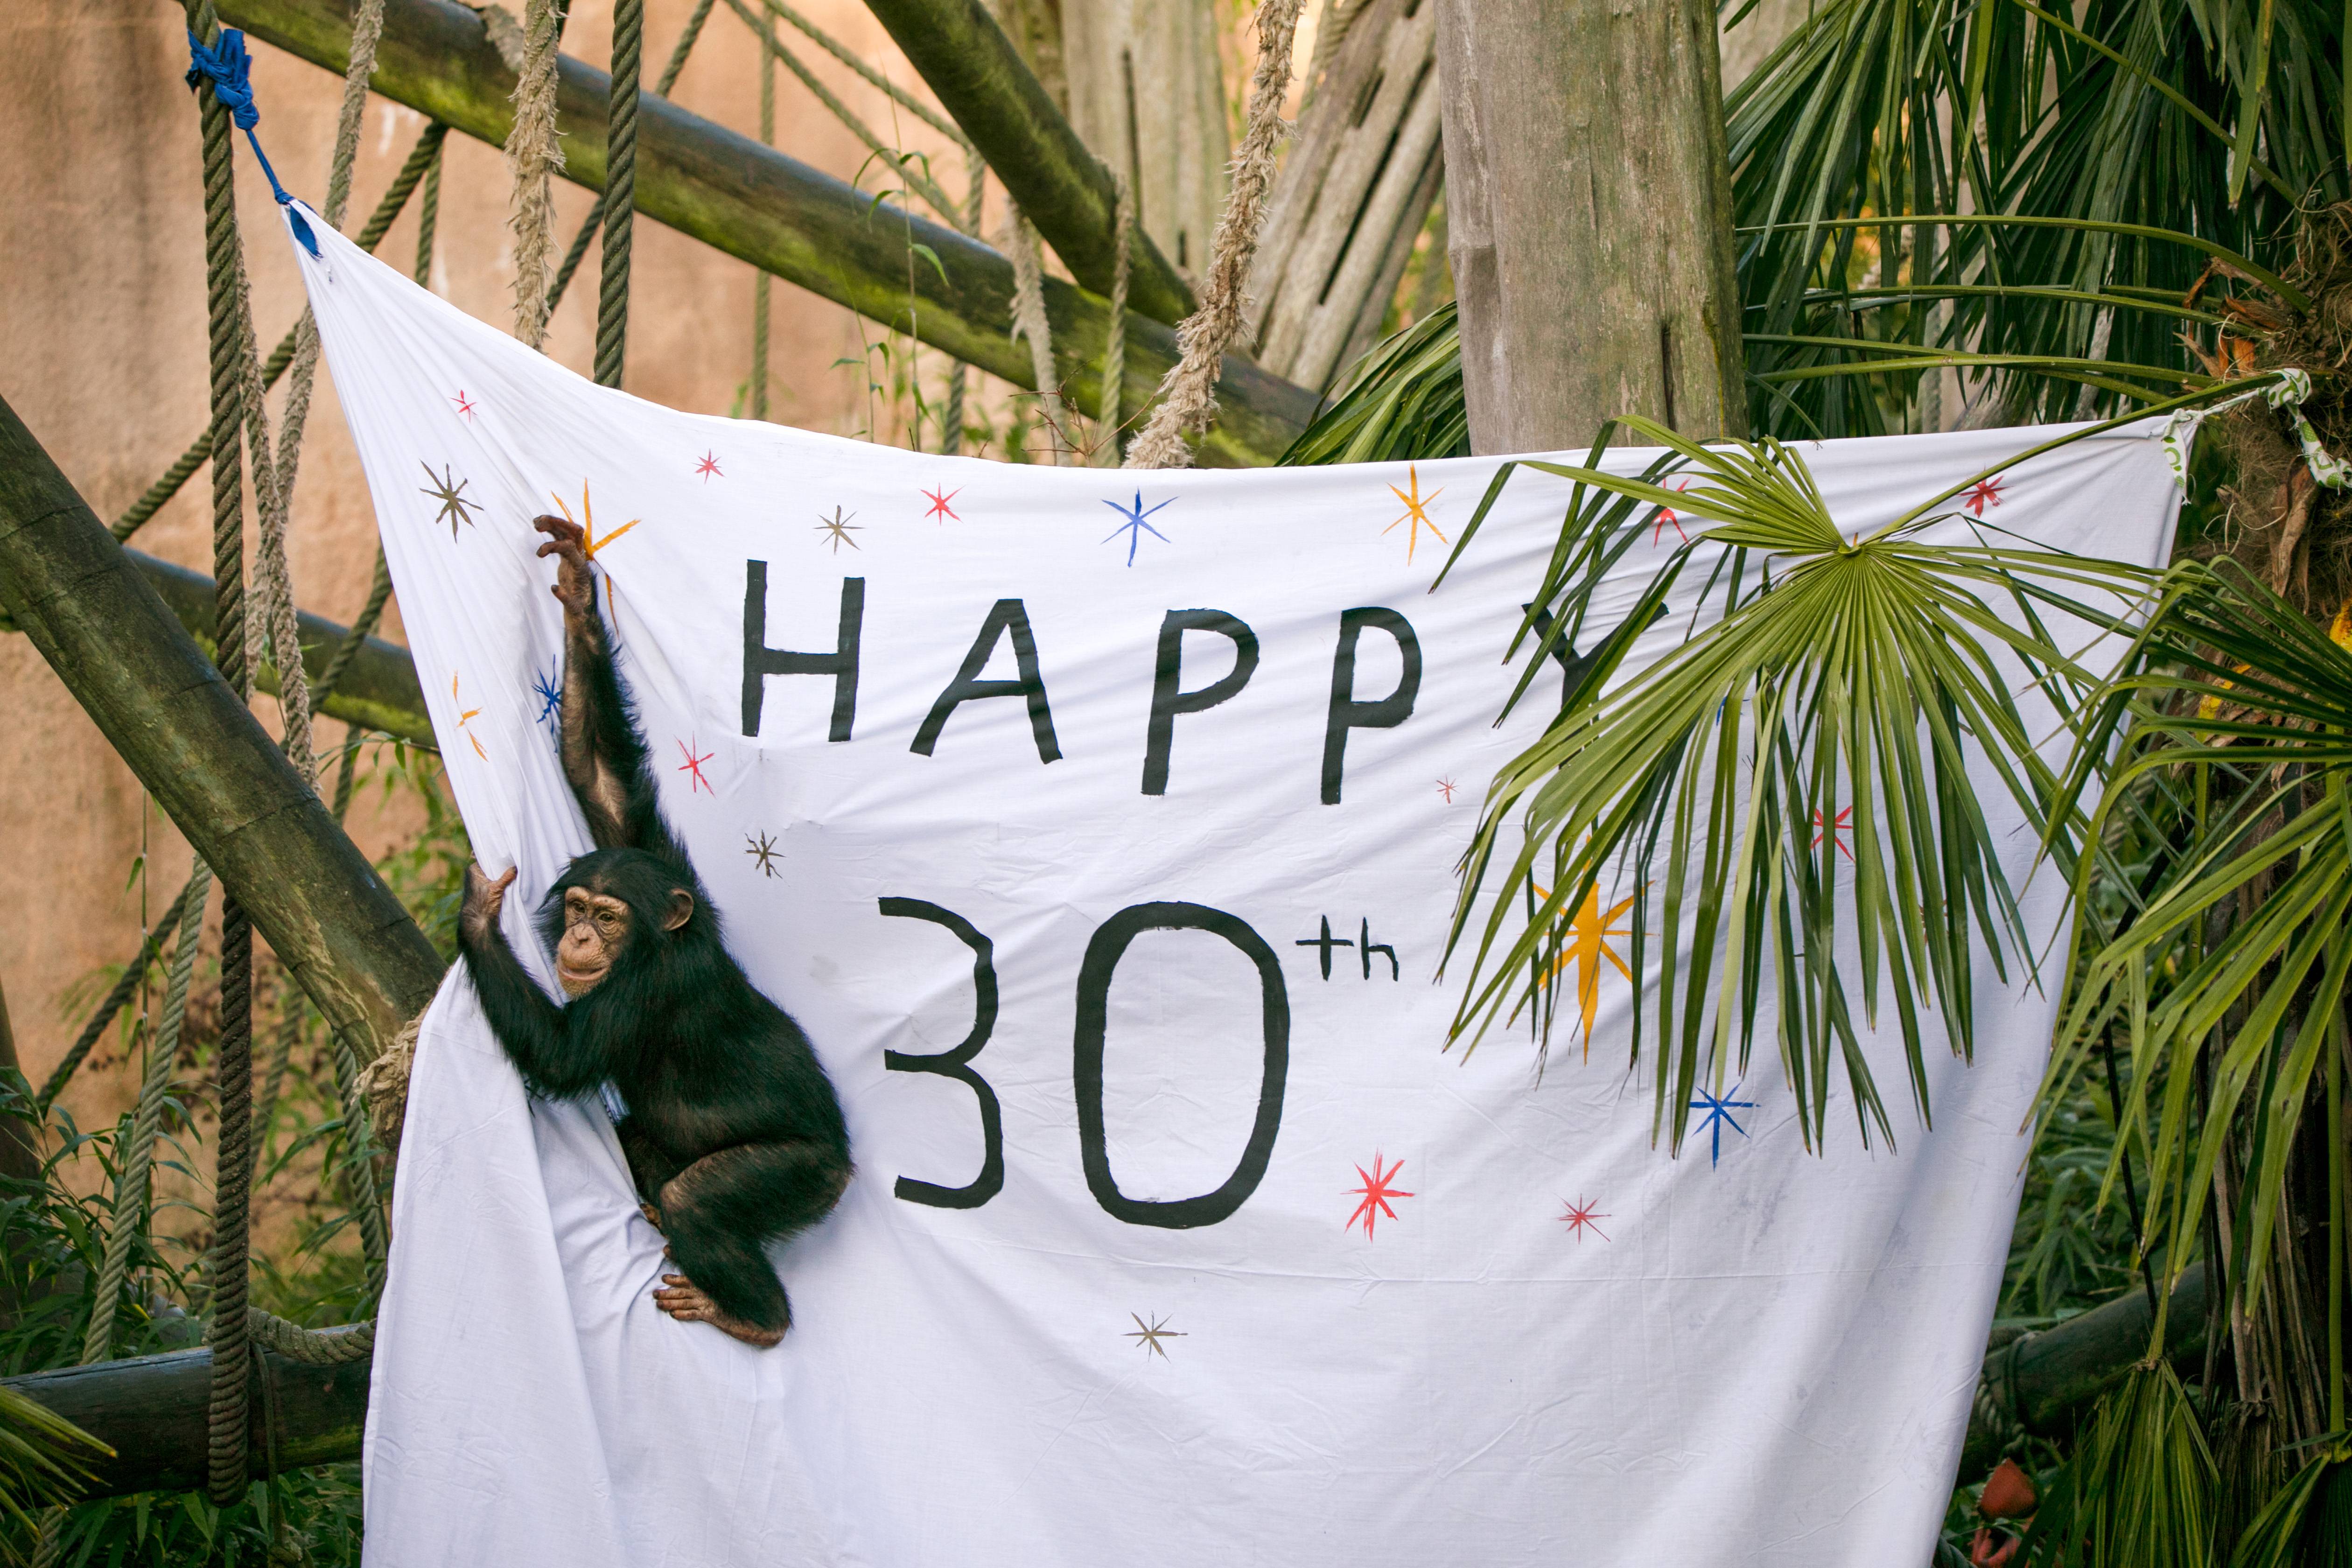 Chimpanzee Masindi swinging on sheet painted with happy 30th birthday for enrichment

IMAGE: Allie McGregor 2023